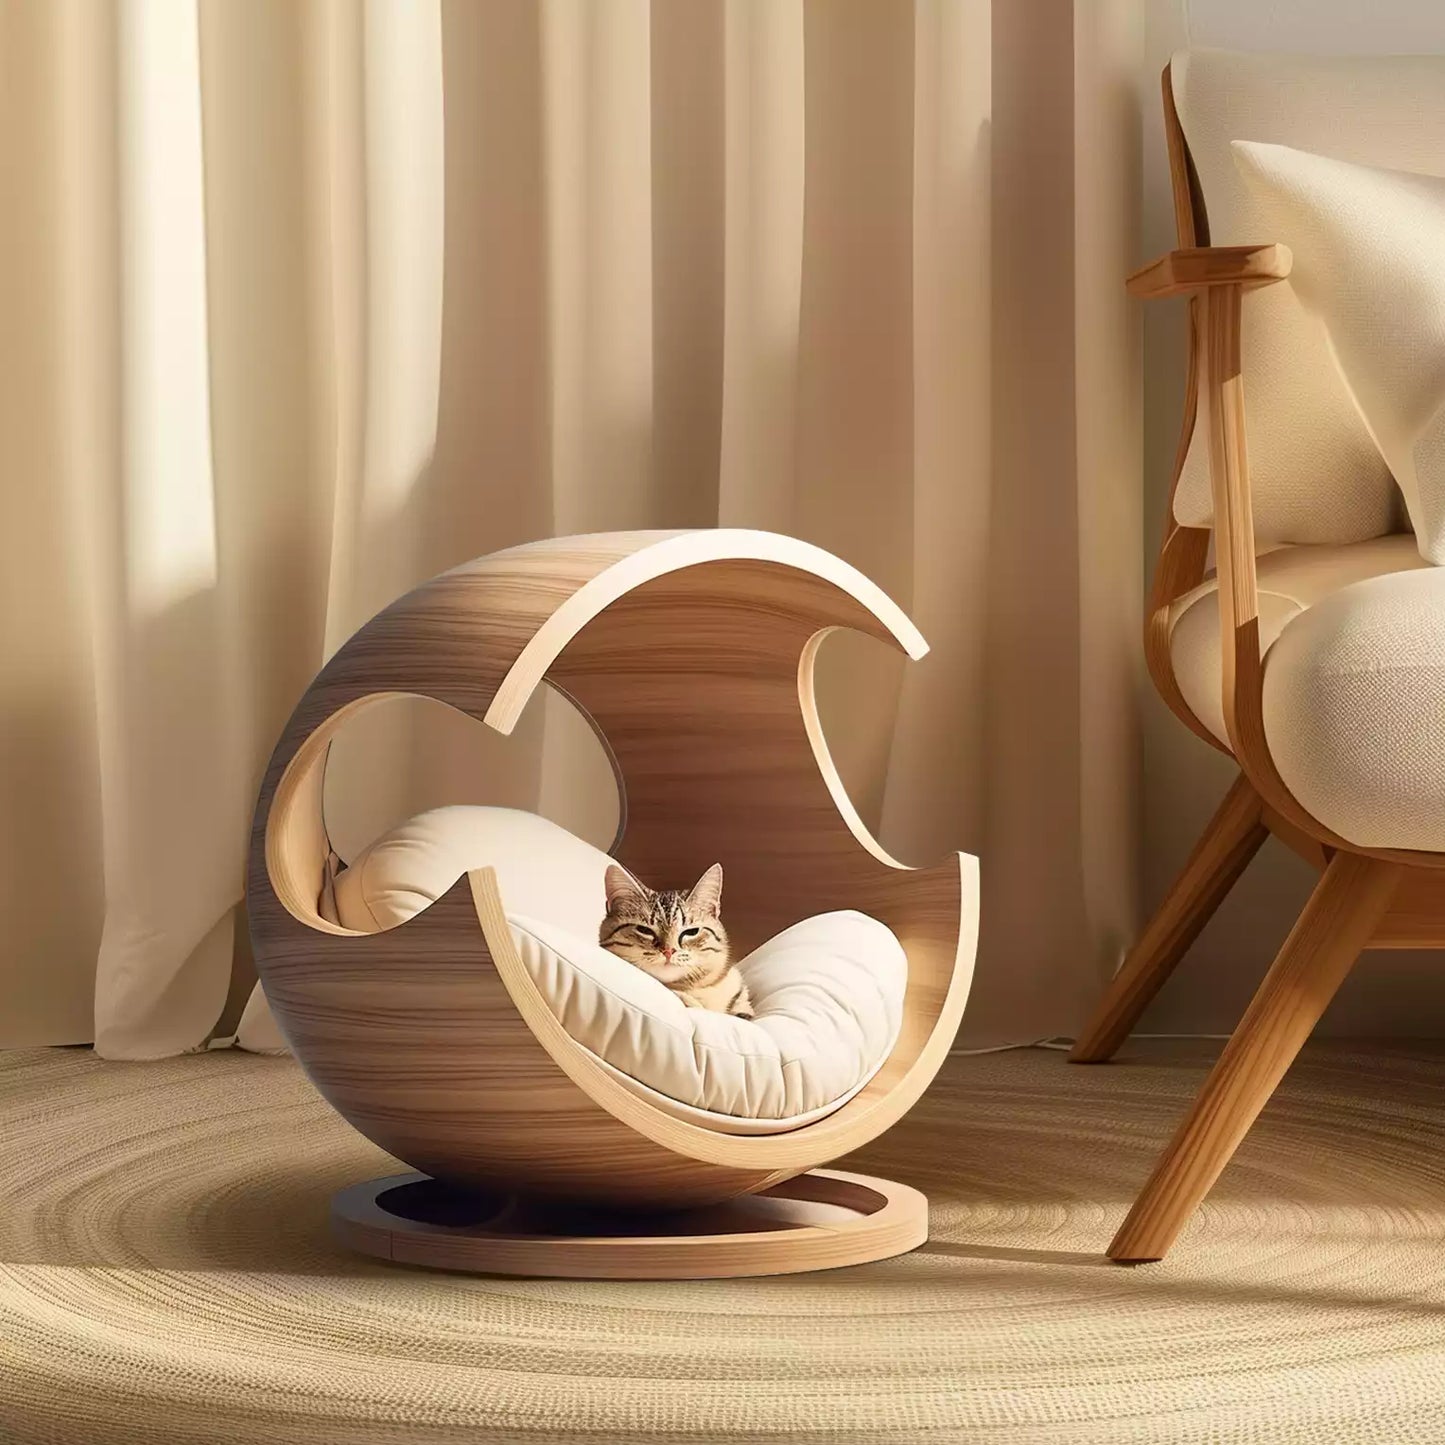 Customized Comfort, Chic 3D-Printed Cat Bed, Soft & Stylish for Cat and Small-Breed Dog